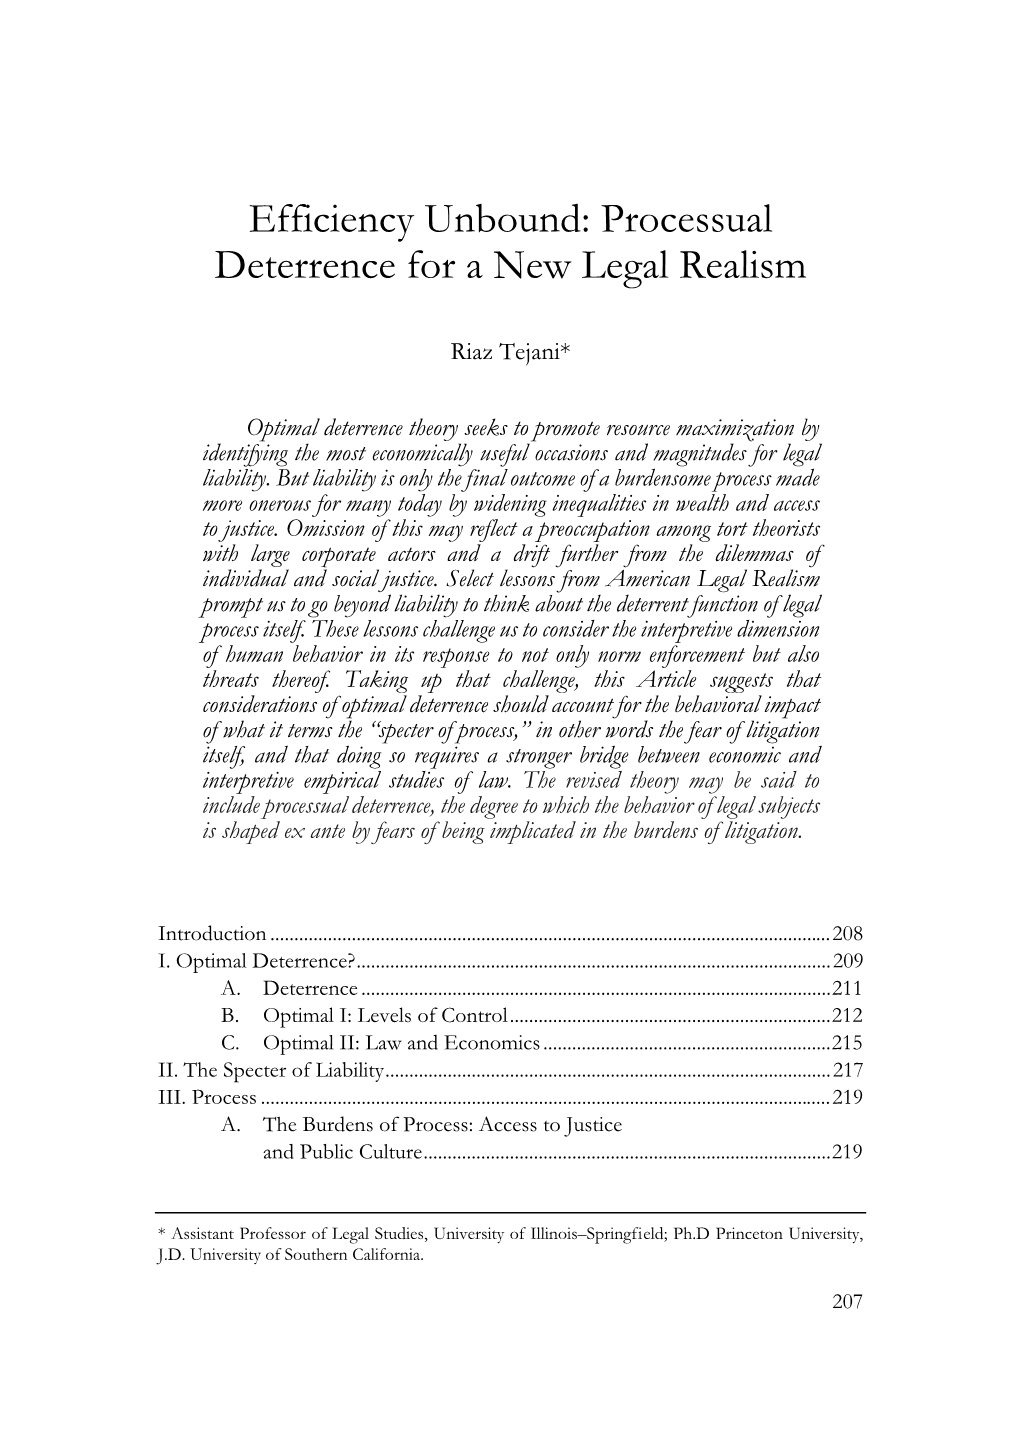 Processual Deterrence for a New Legal Realism